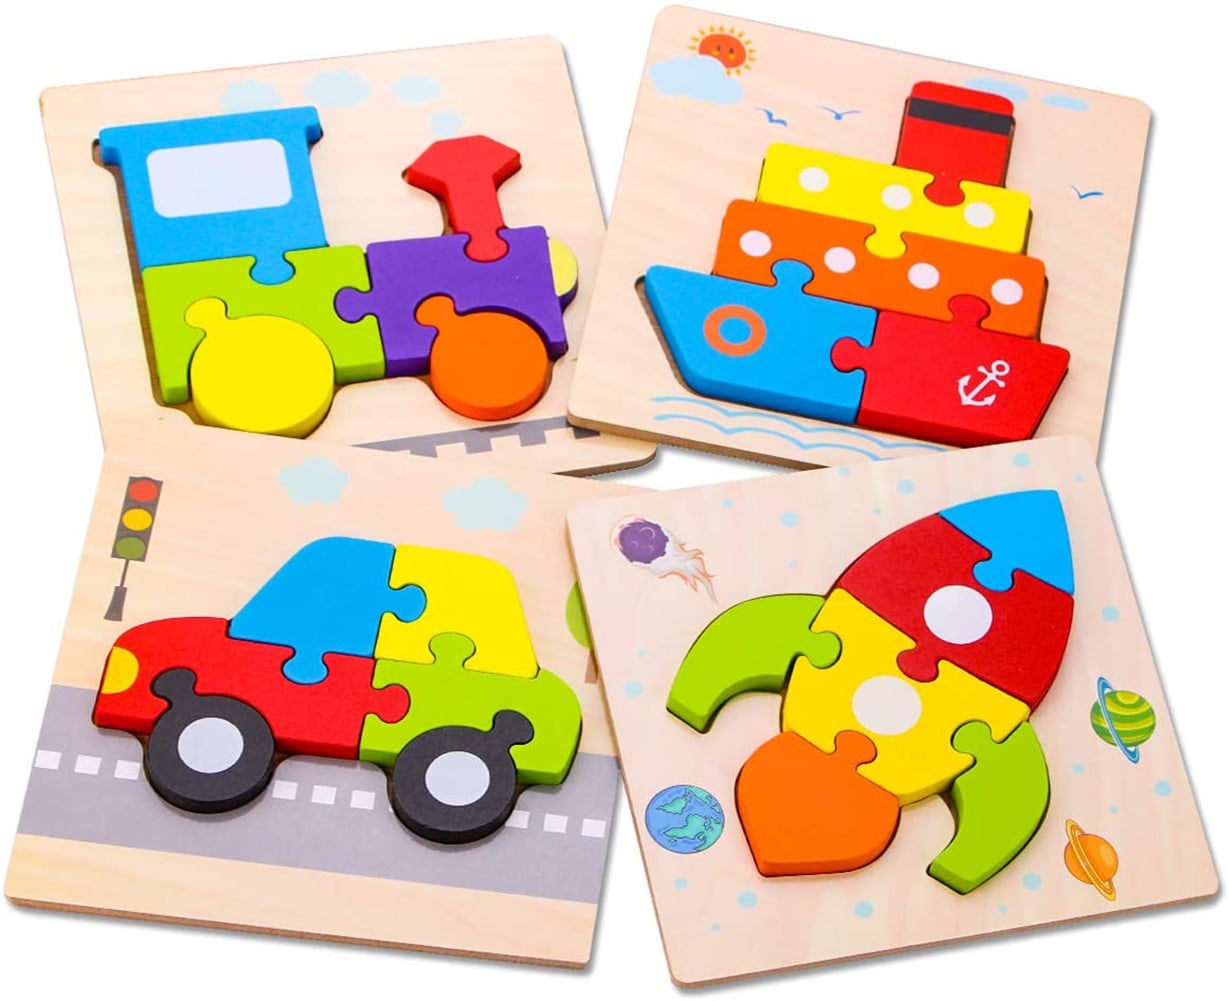 1X Wooden Puzzle Jigsaw Cartoon Baby Kids Educational Learning Tool Set Toy NIU 